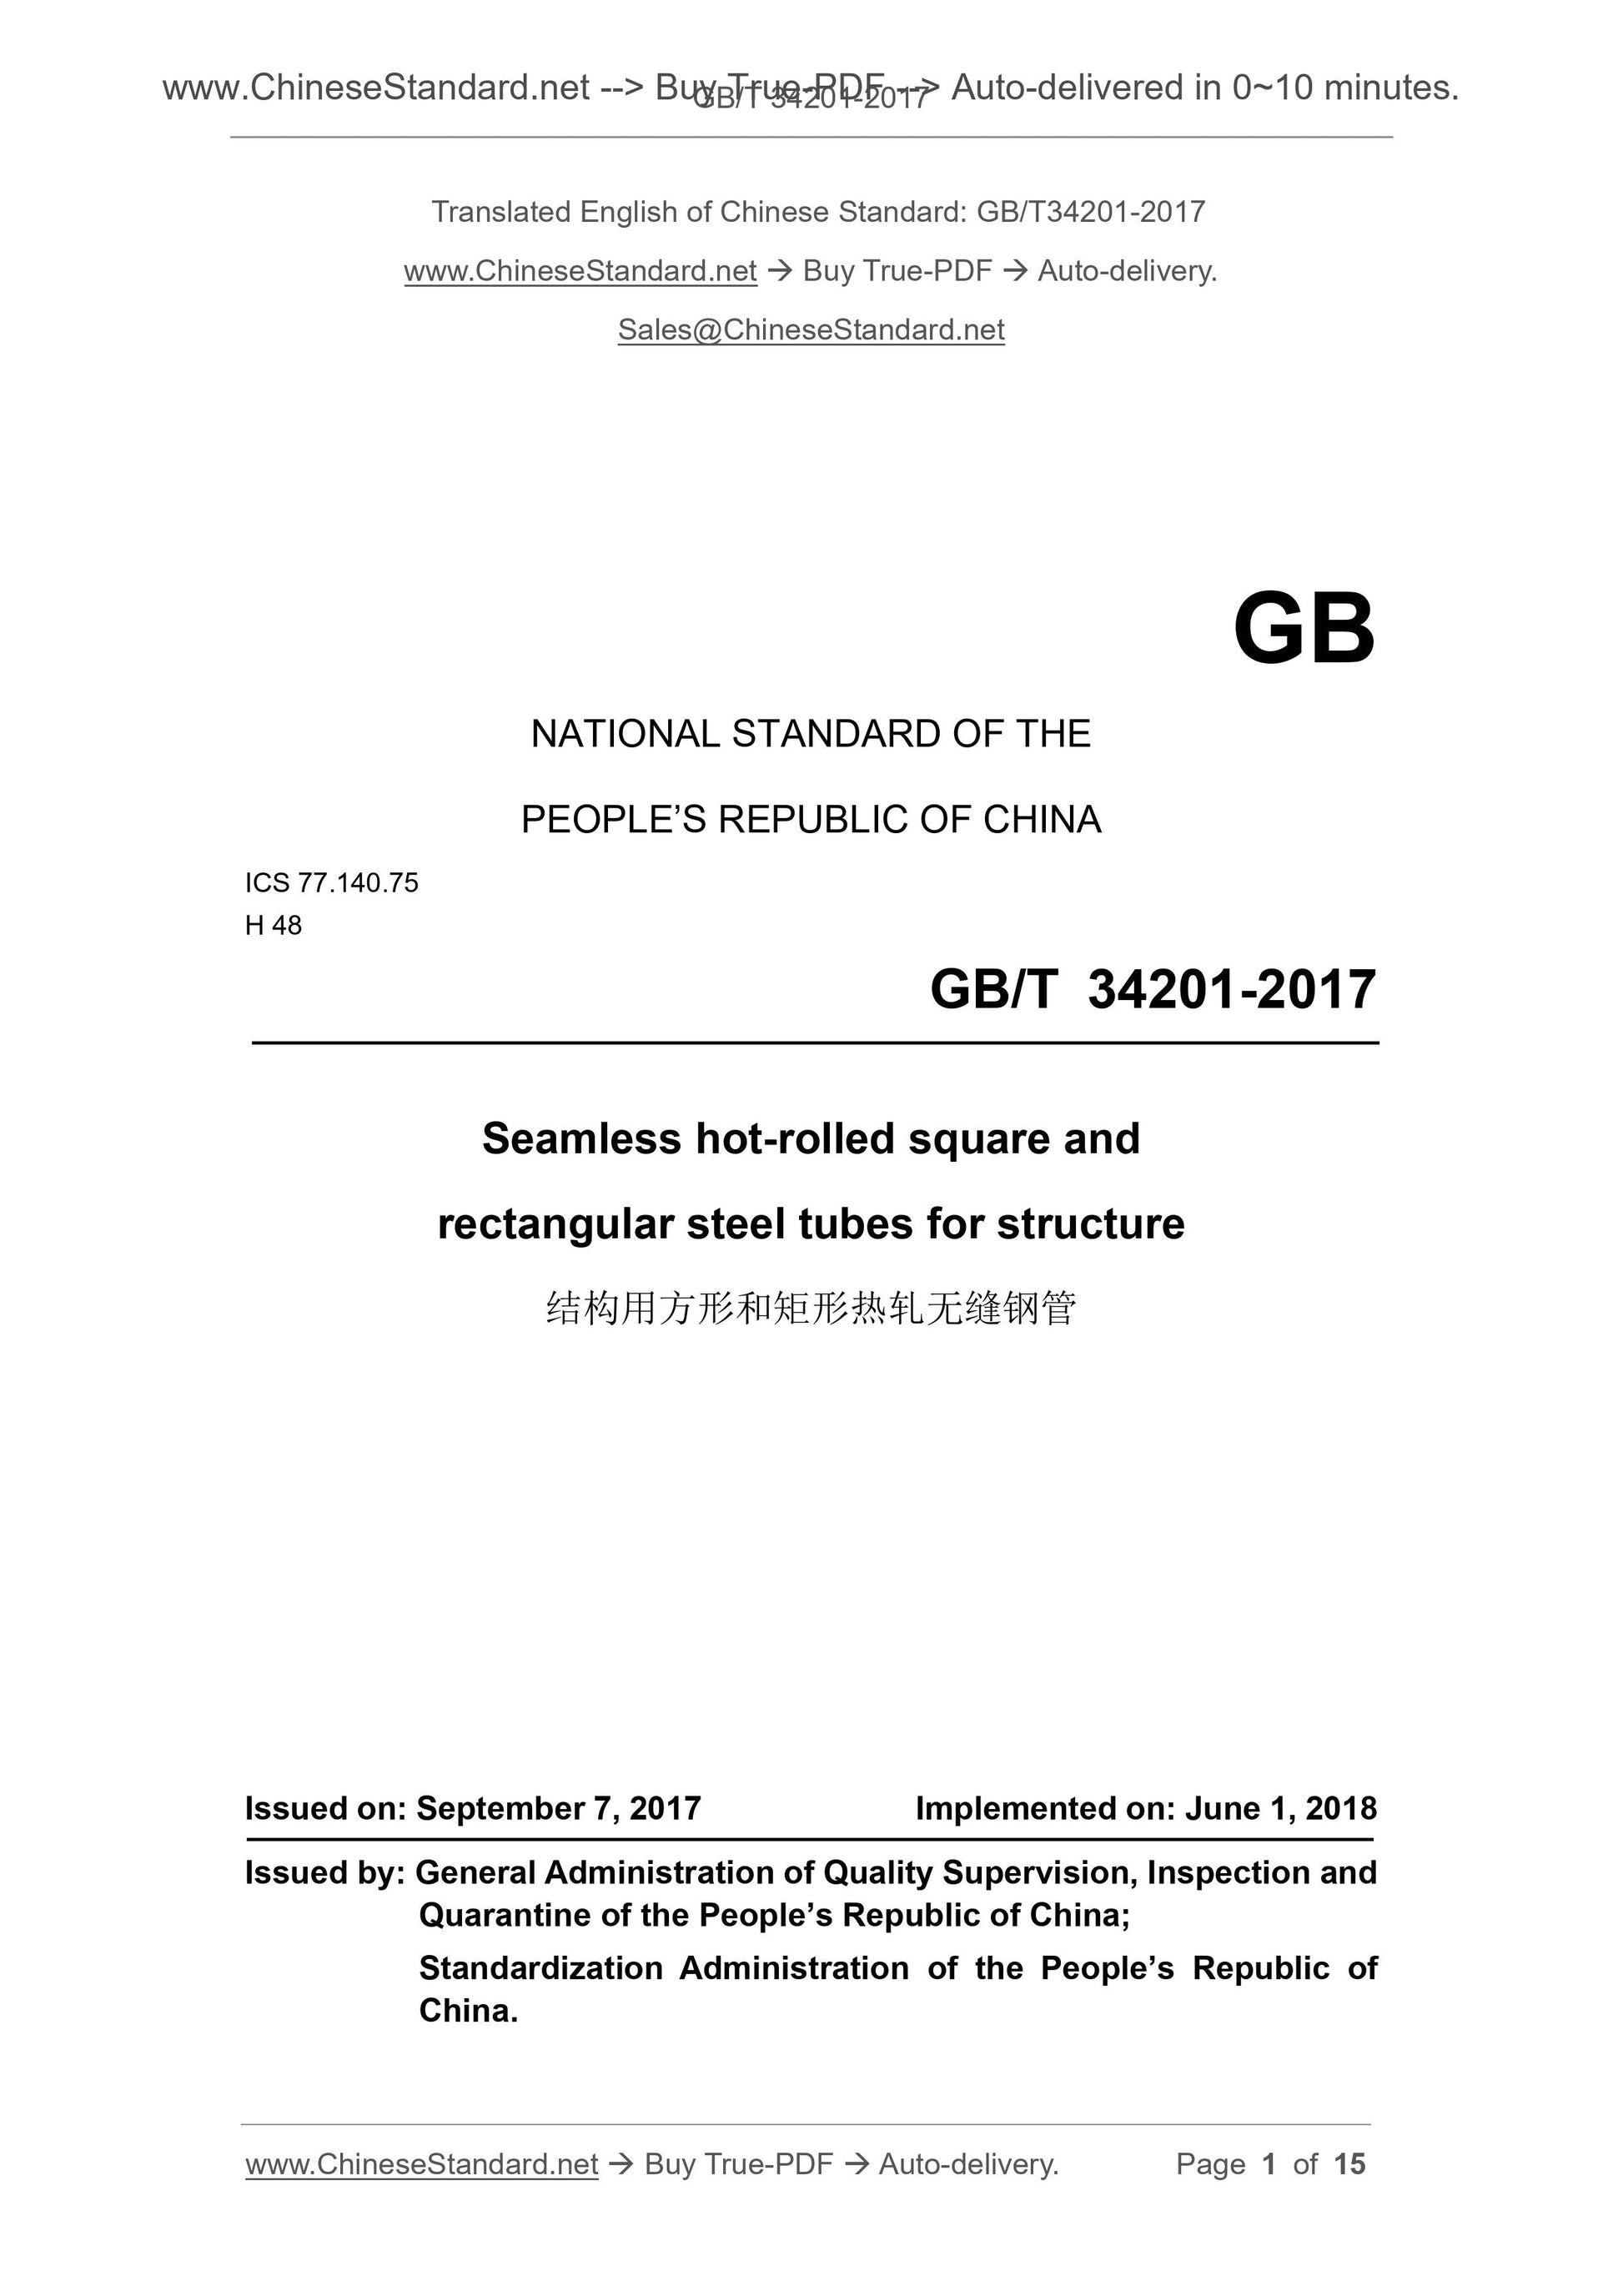 GB/T 34201-2017 Page 1